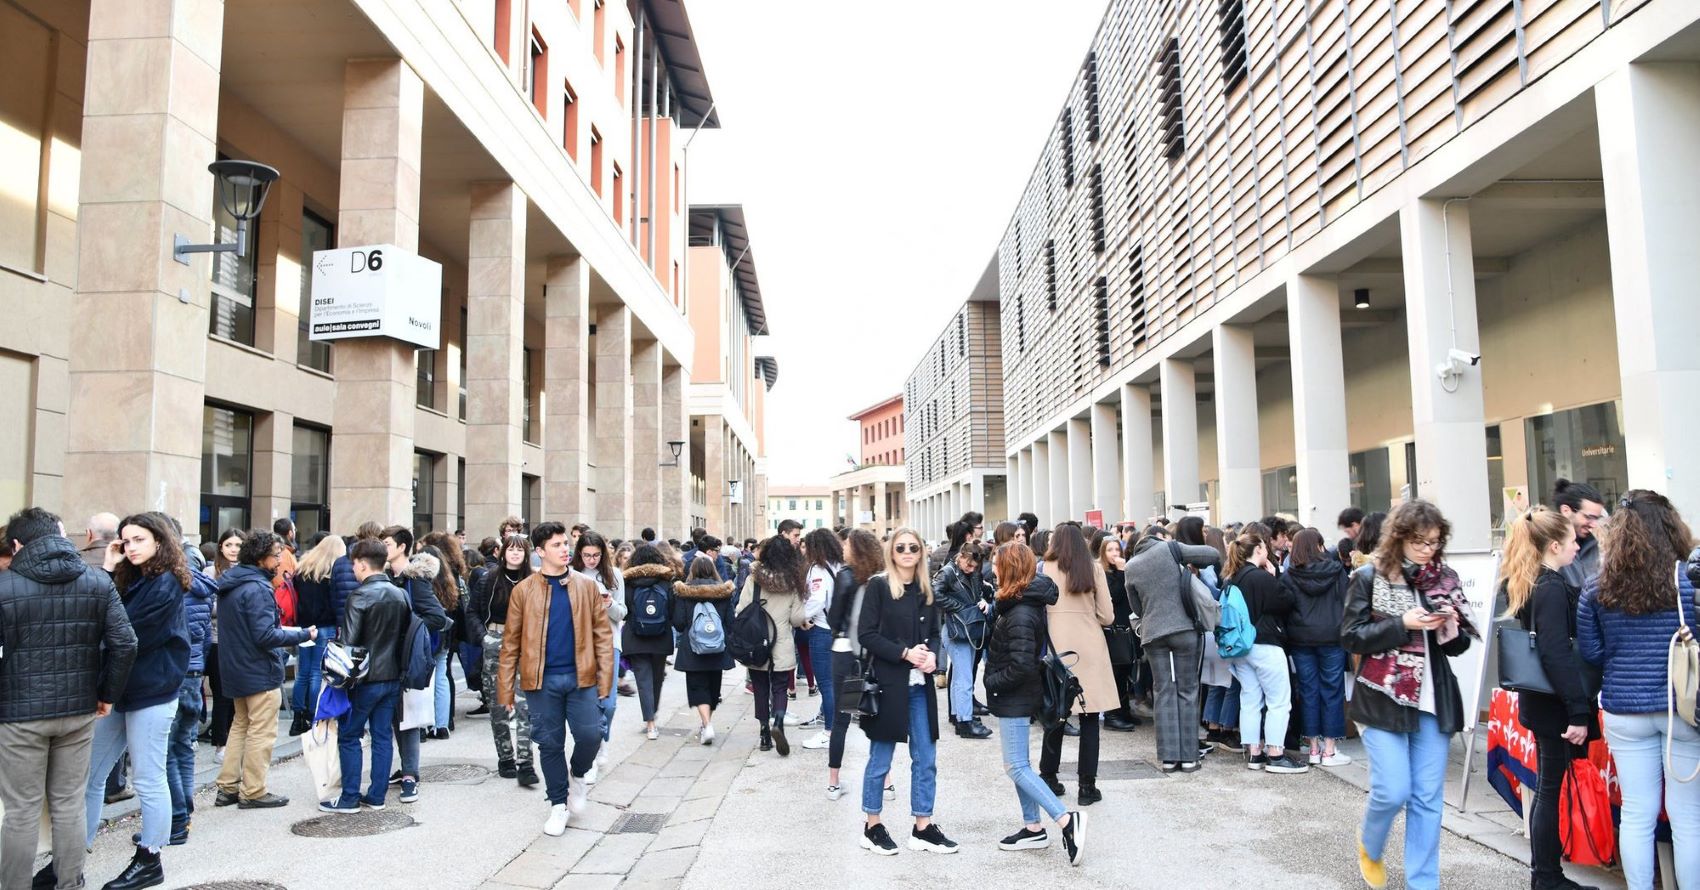 10-extraordinary-facts-about-university-of-florence